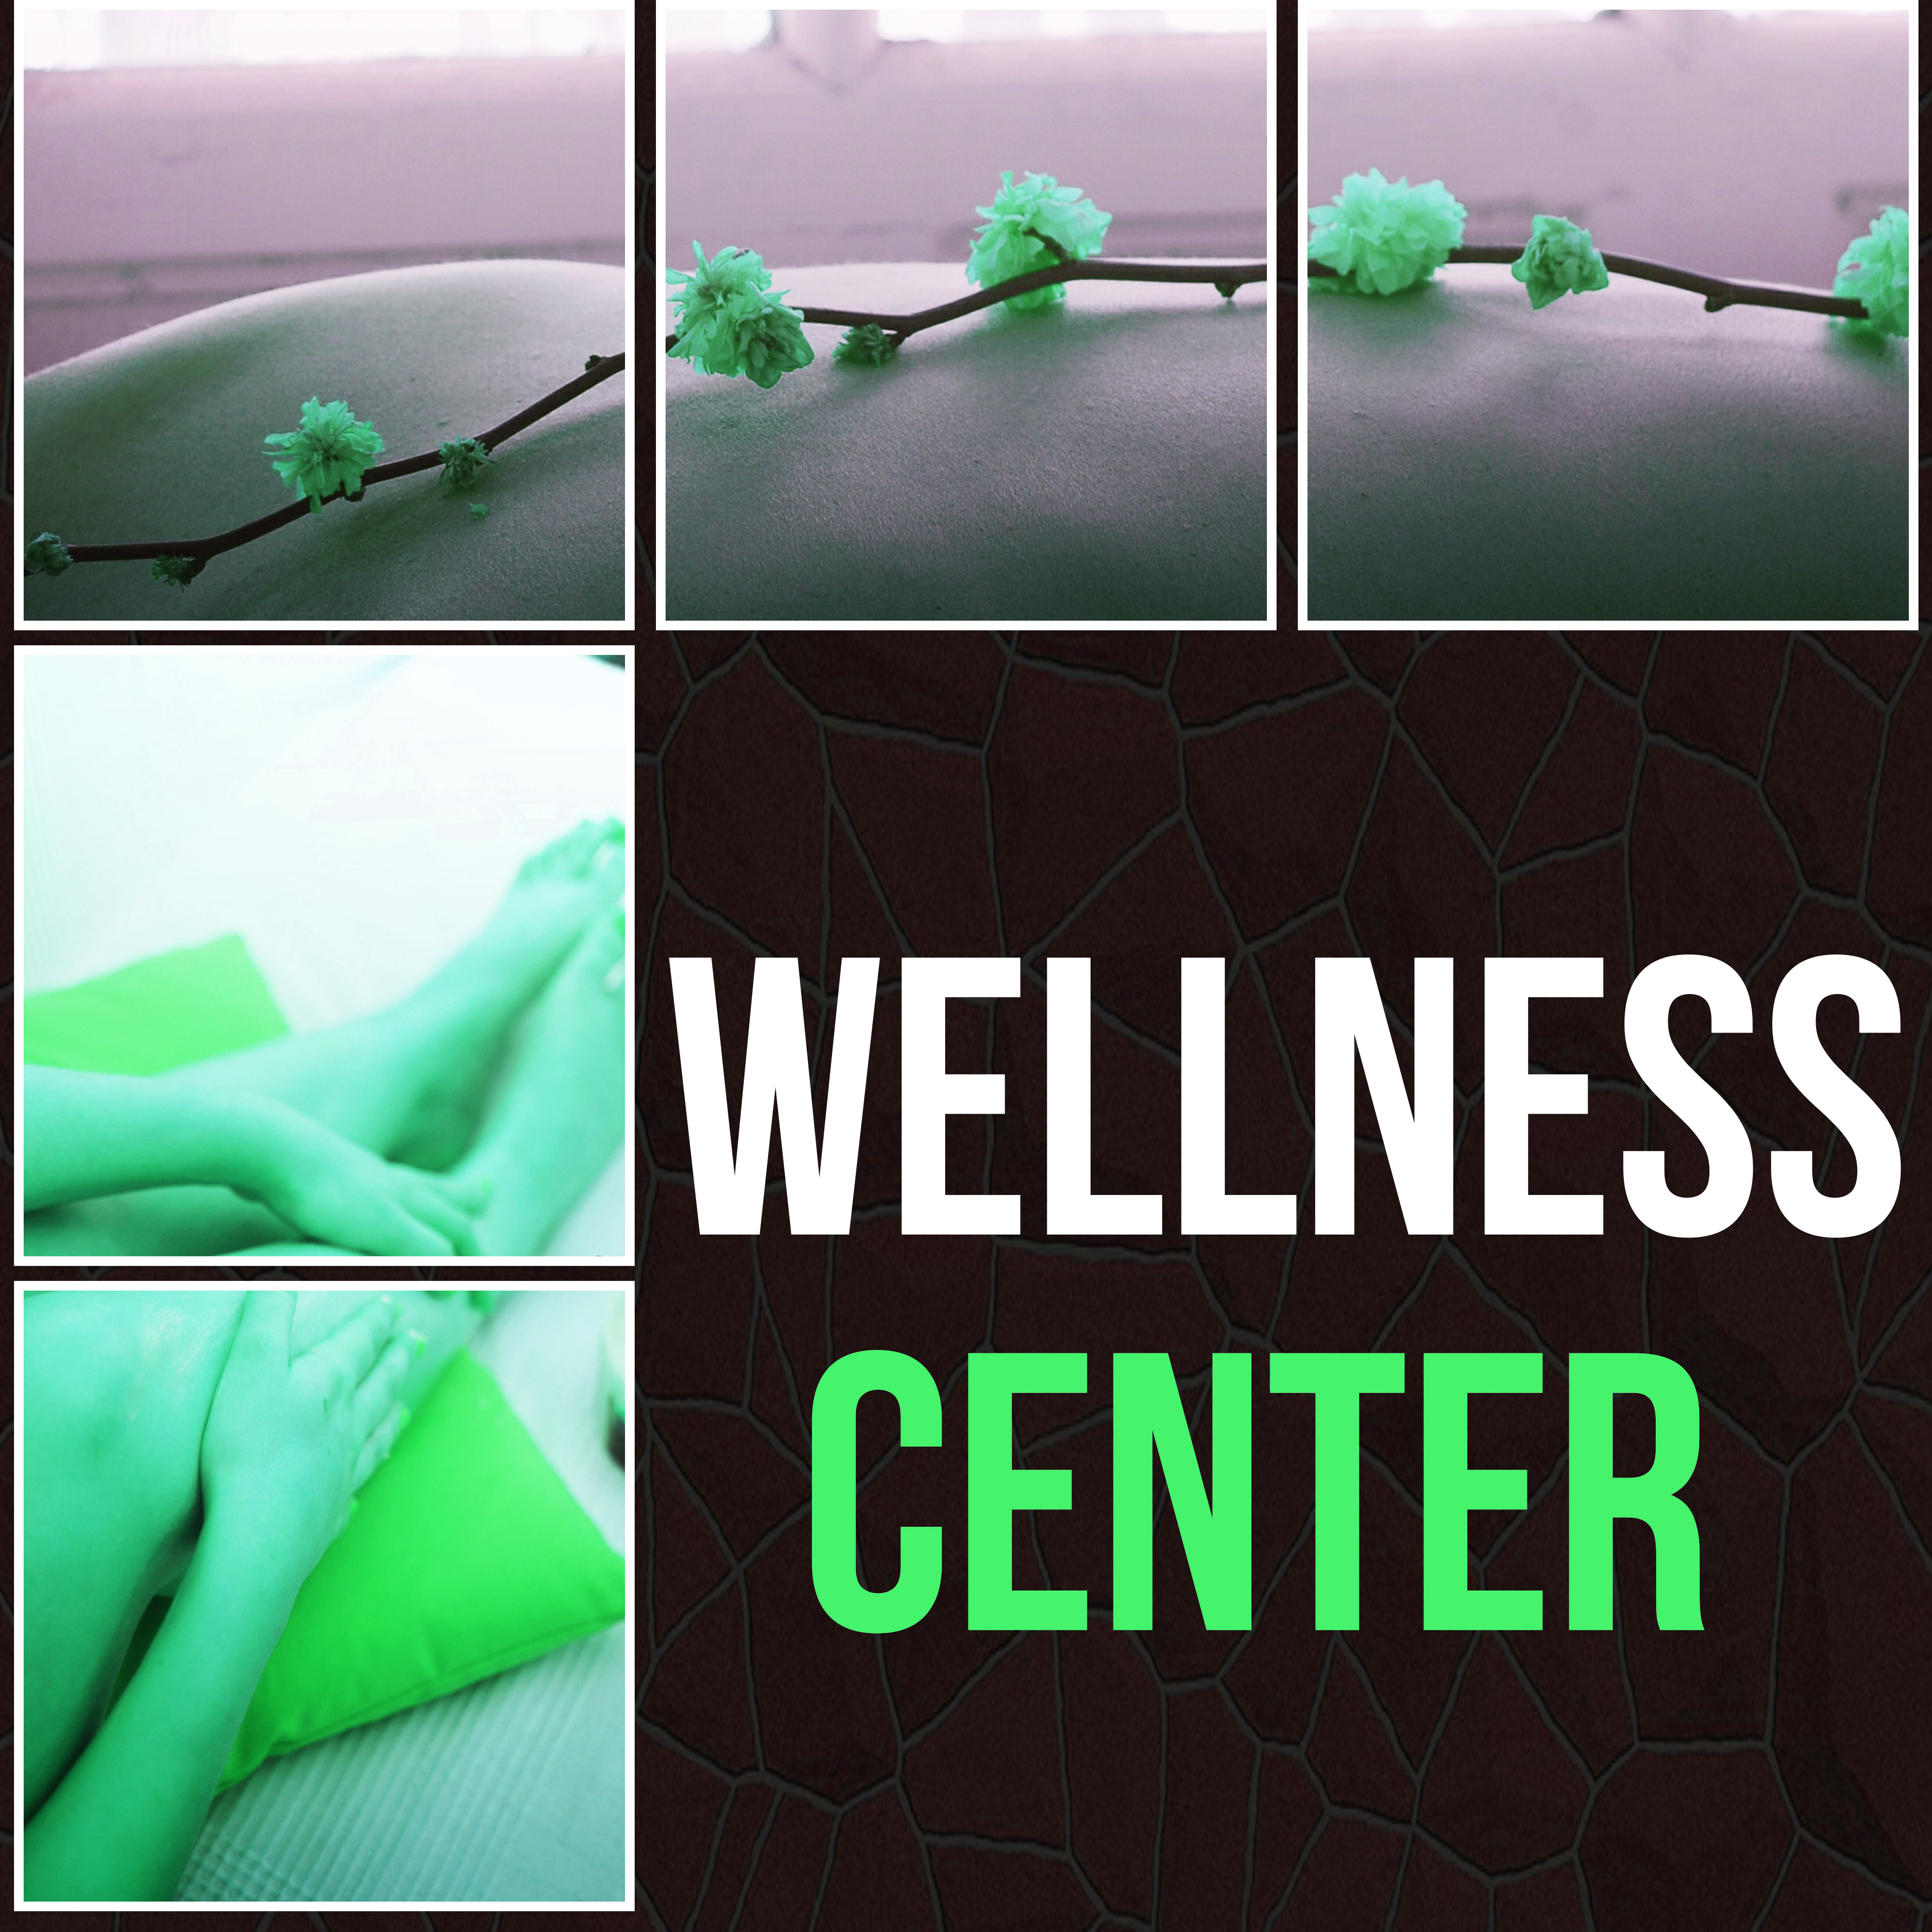 Wellness Center – Massage Relaxation, Sound Therapy, Nature Sounds, Tranquility SPA, Thermal Spa